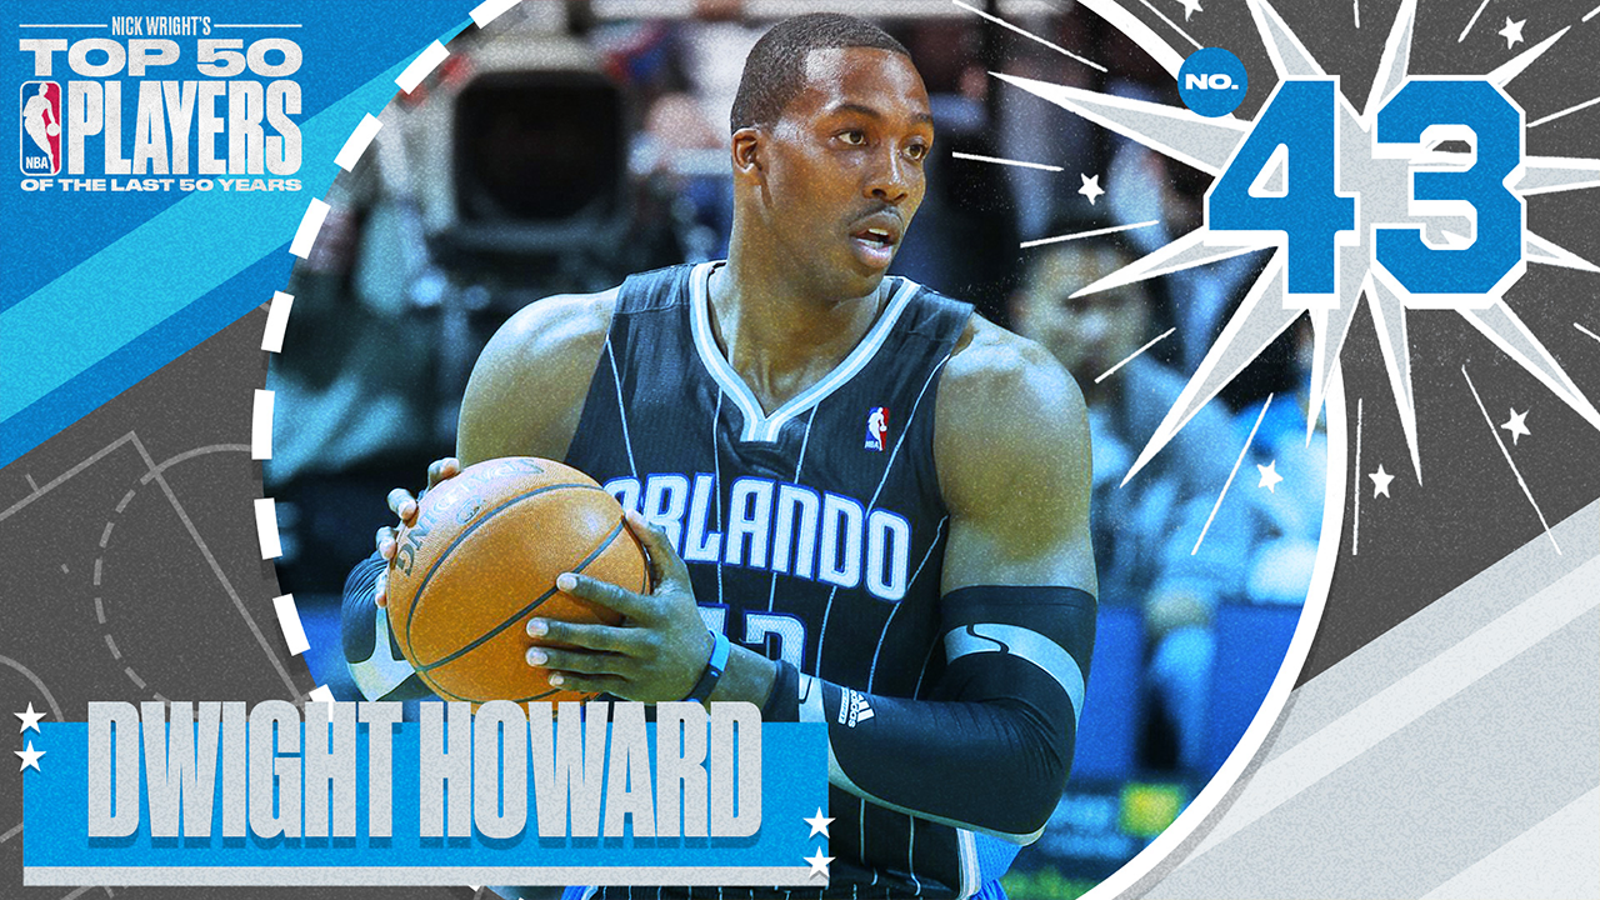 Dwight Howard is No. 43 on Nick Wright's Top 50